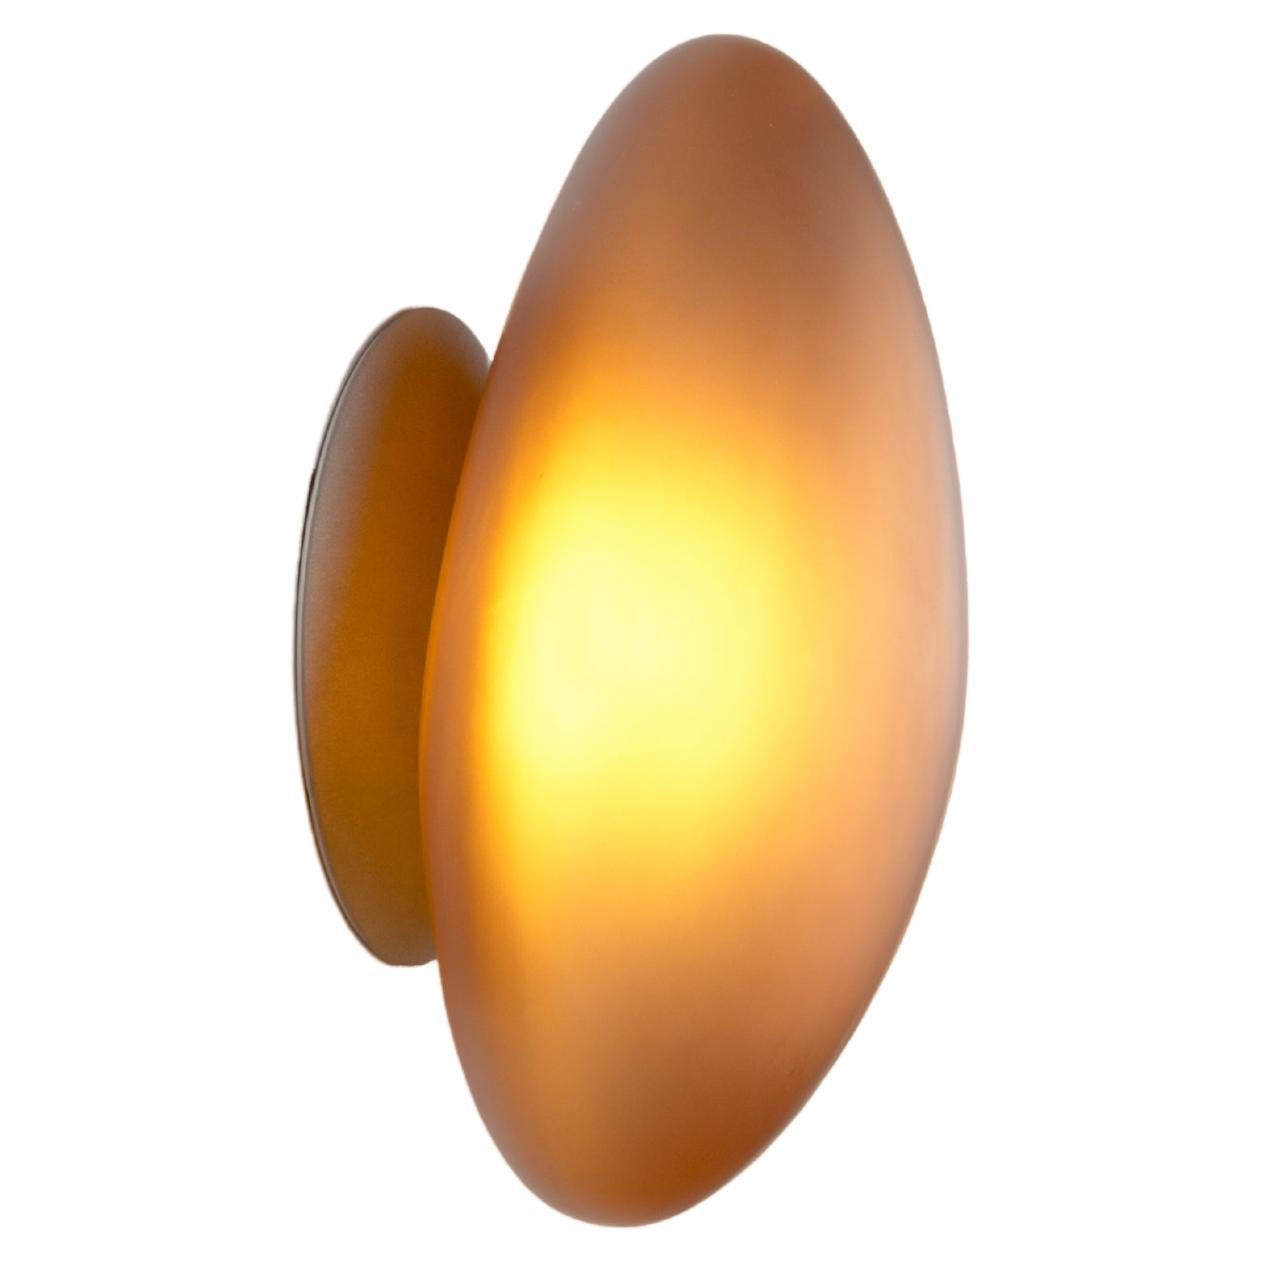 Contemporary Wall Lamp 'Pebble' by Andlight, Shape C, Citrine